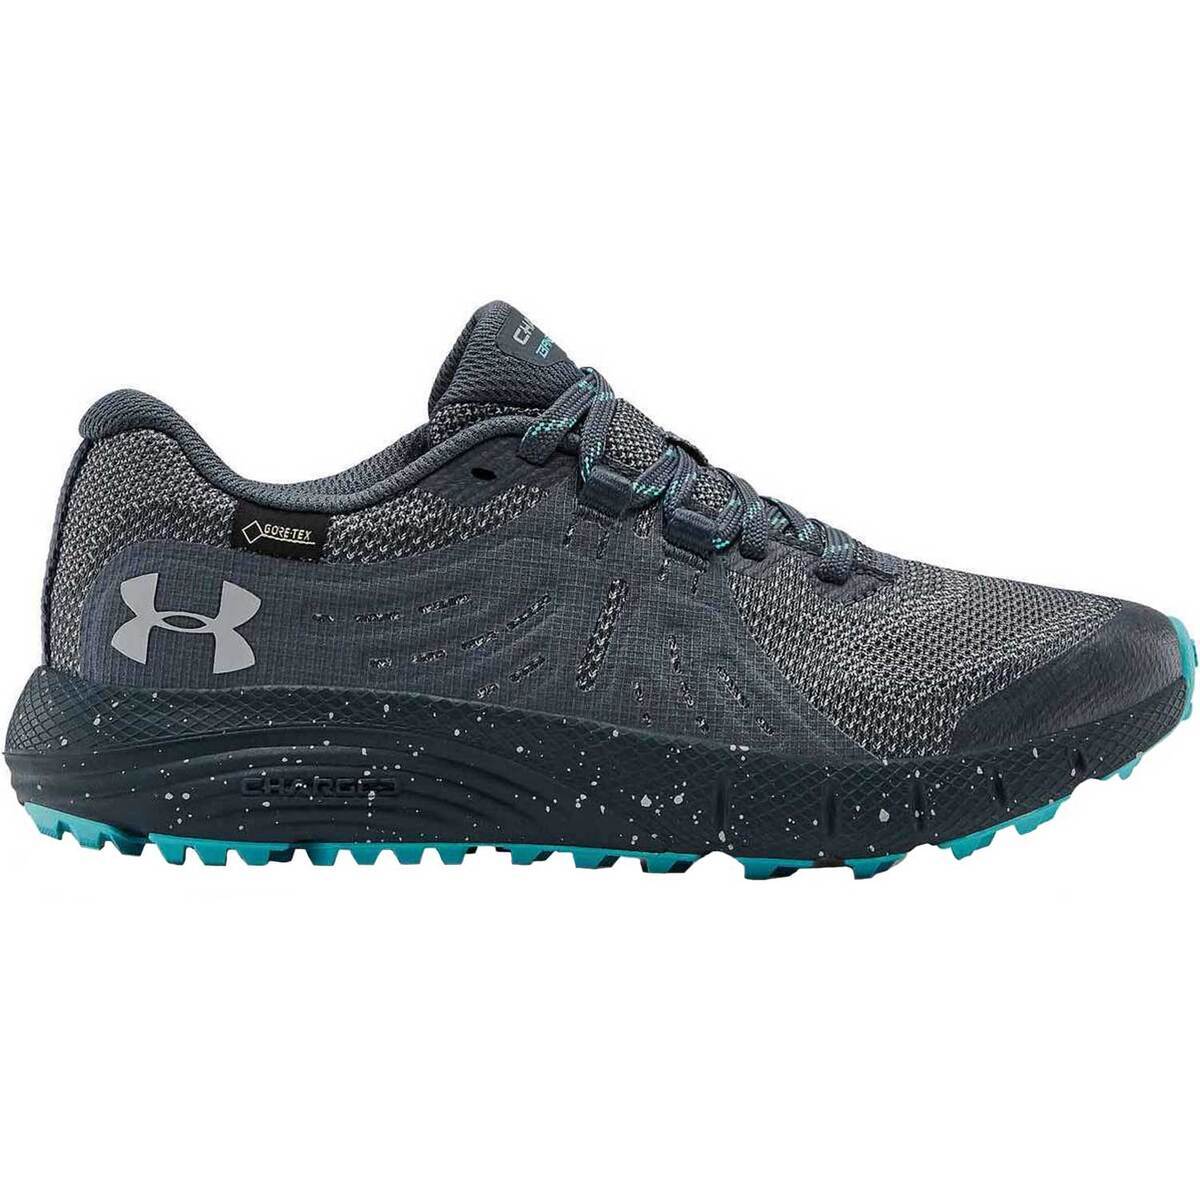 Under Armour Women's Charged Bandit Trail Waterproof Trail Running ...